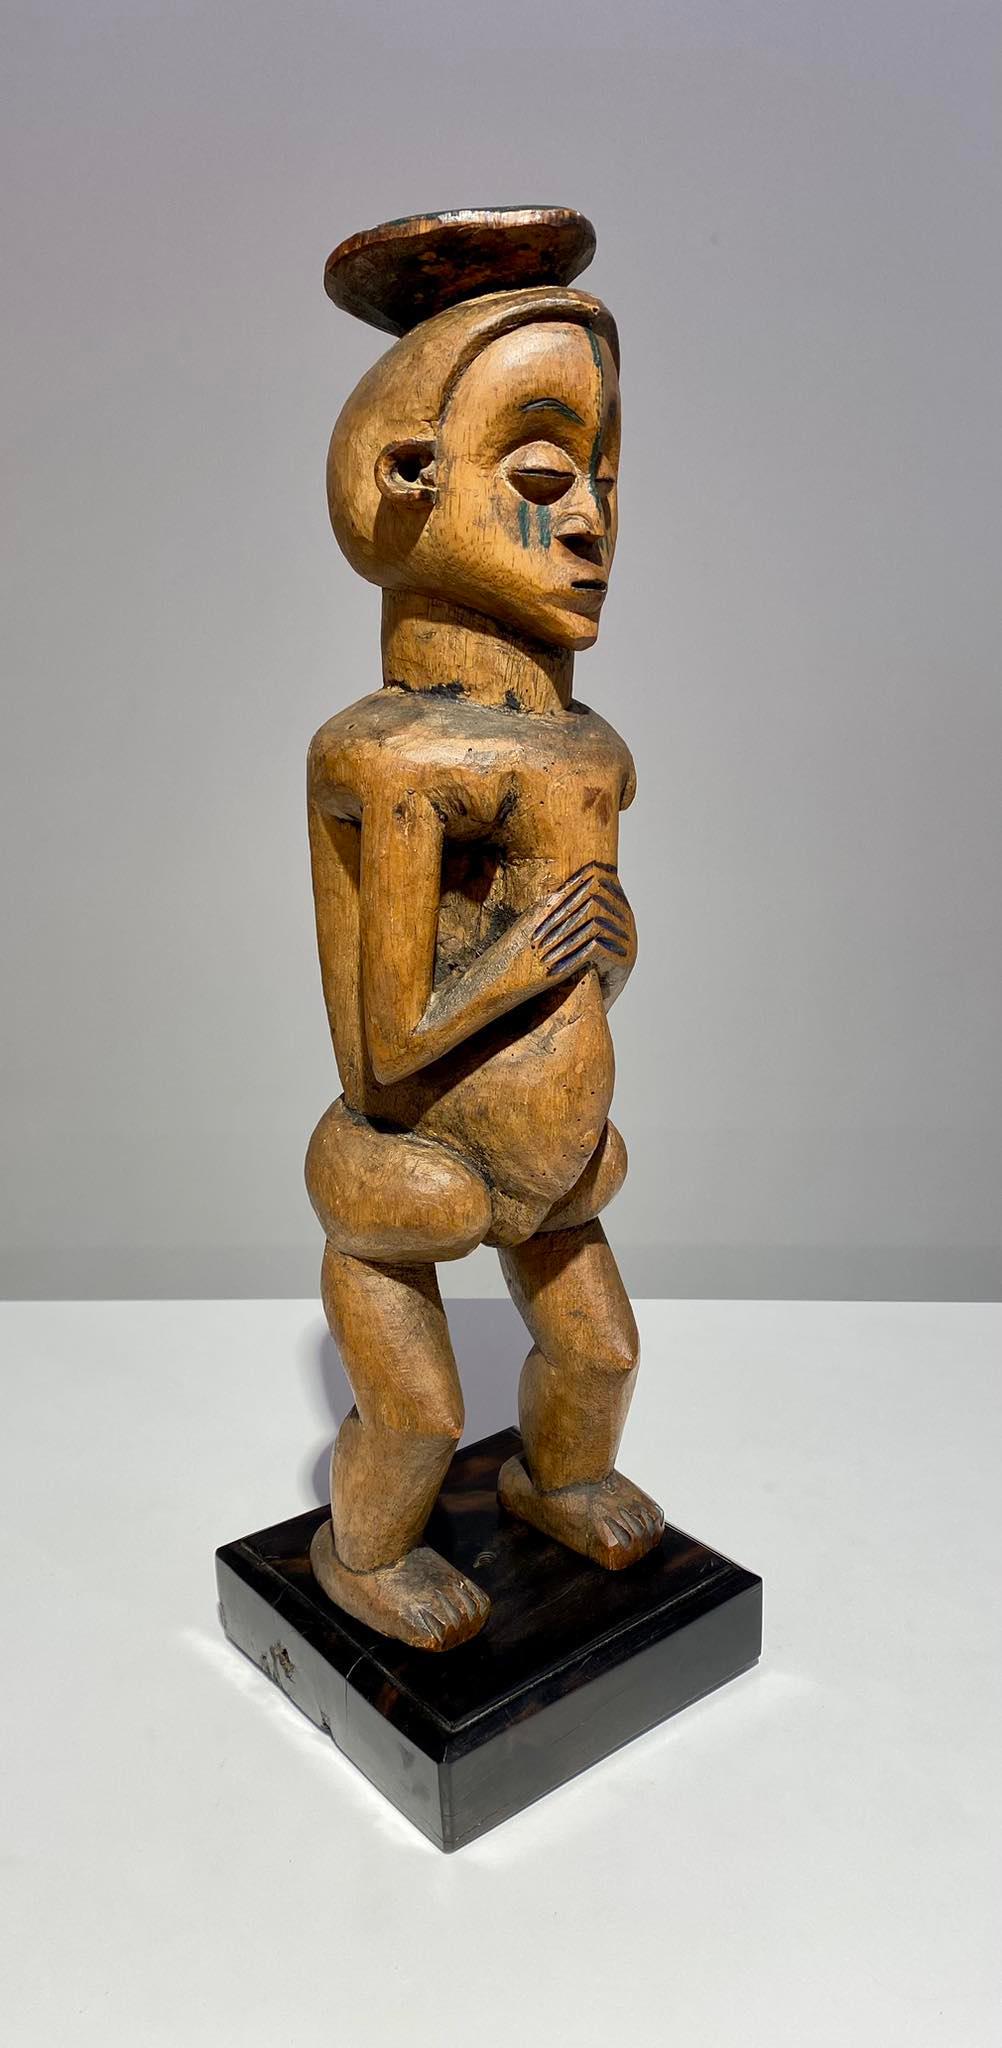 Superb and rare museum quality Holo mvunzi wooden statue late 19th/early 20 th century DR Congo / Angola

For sale at Art Gallery Decoster Belgium

Tribe : Holo
Country DR Congo border with Angola
Length : 46 cm
Traces of bleu and green